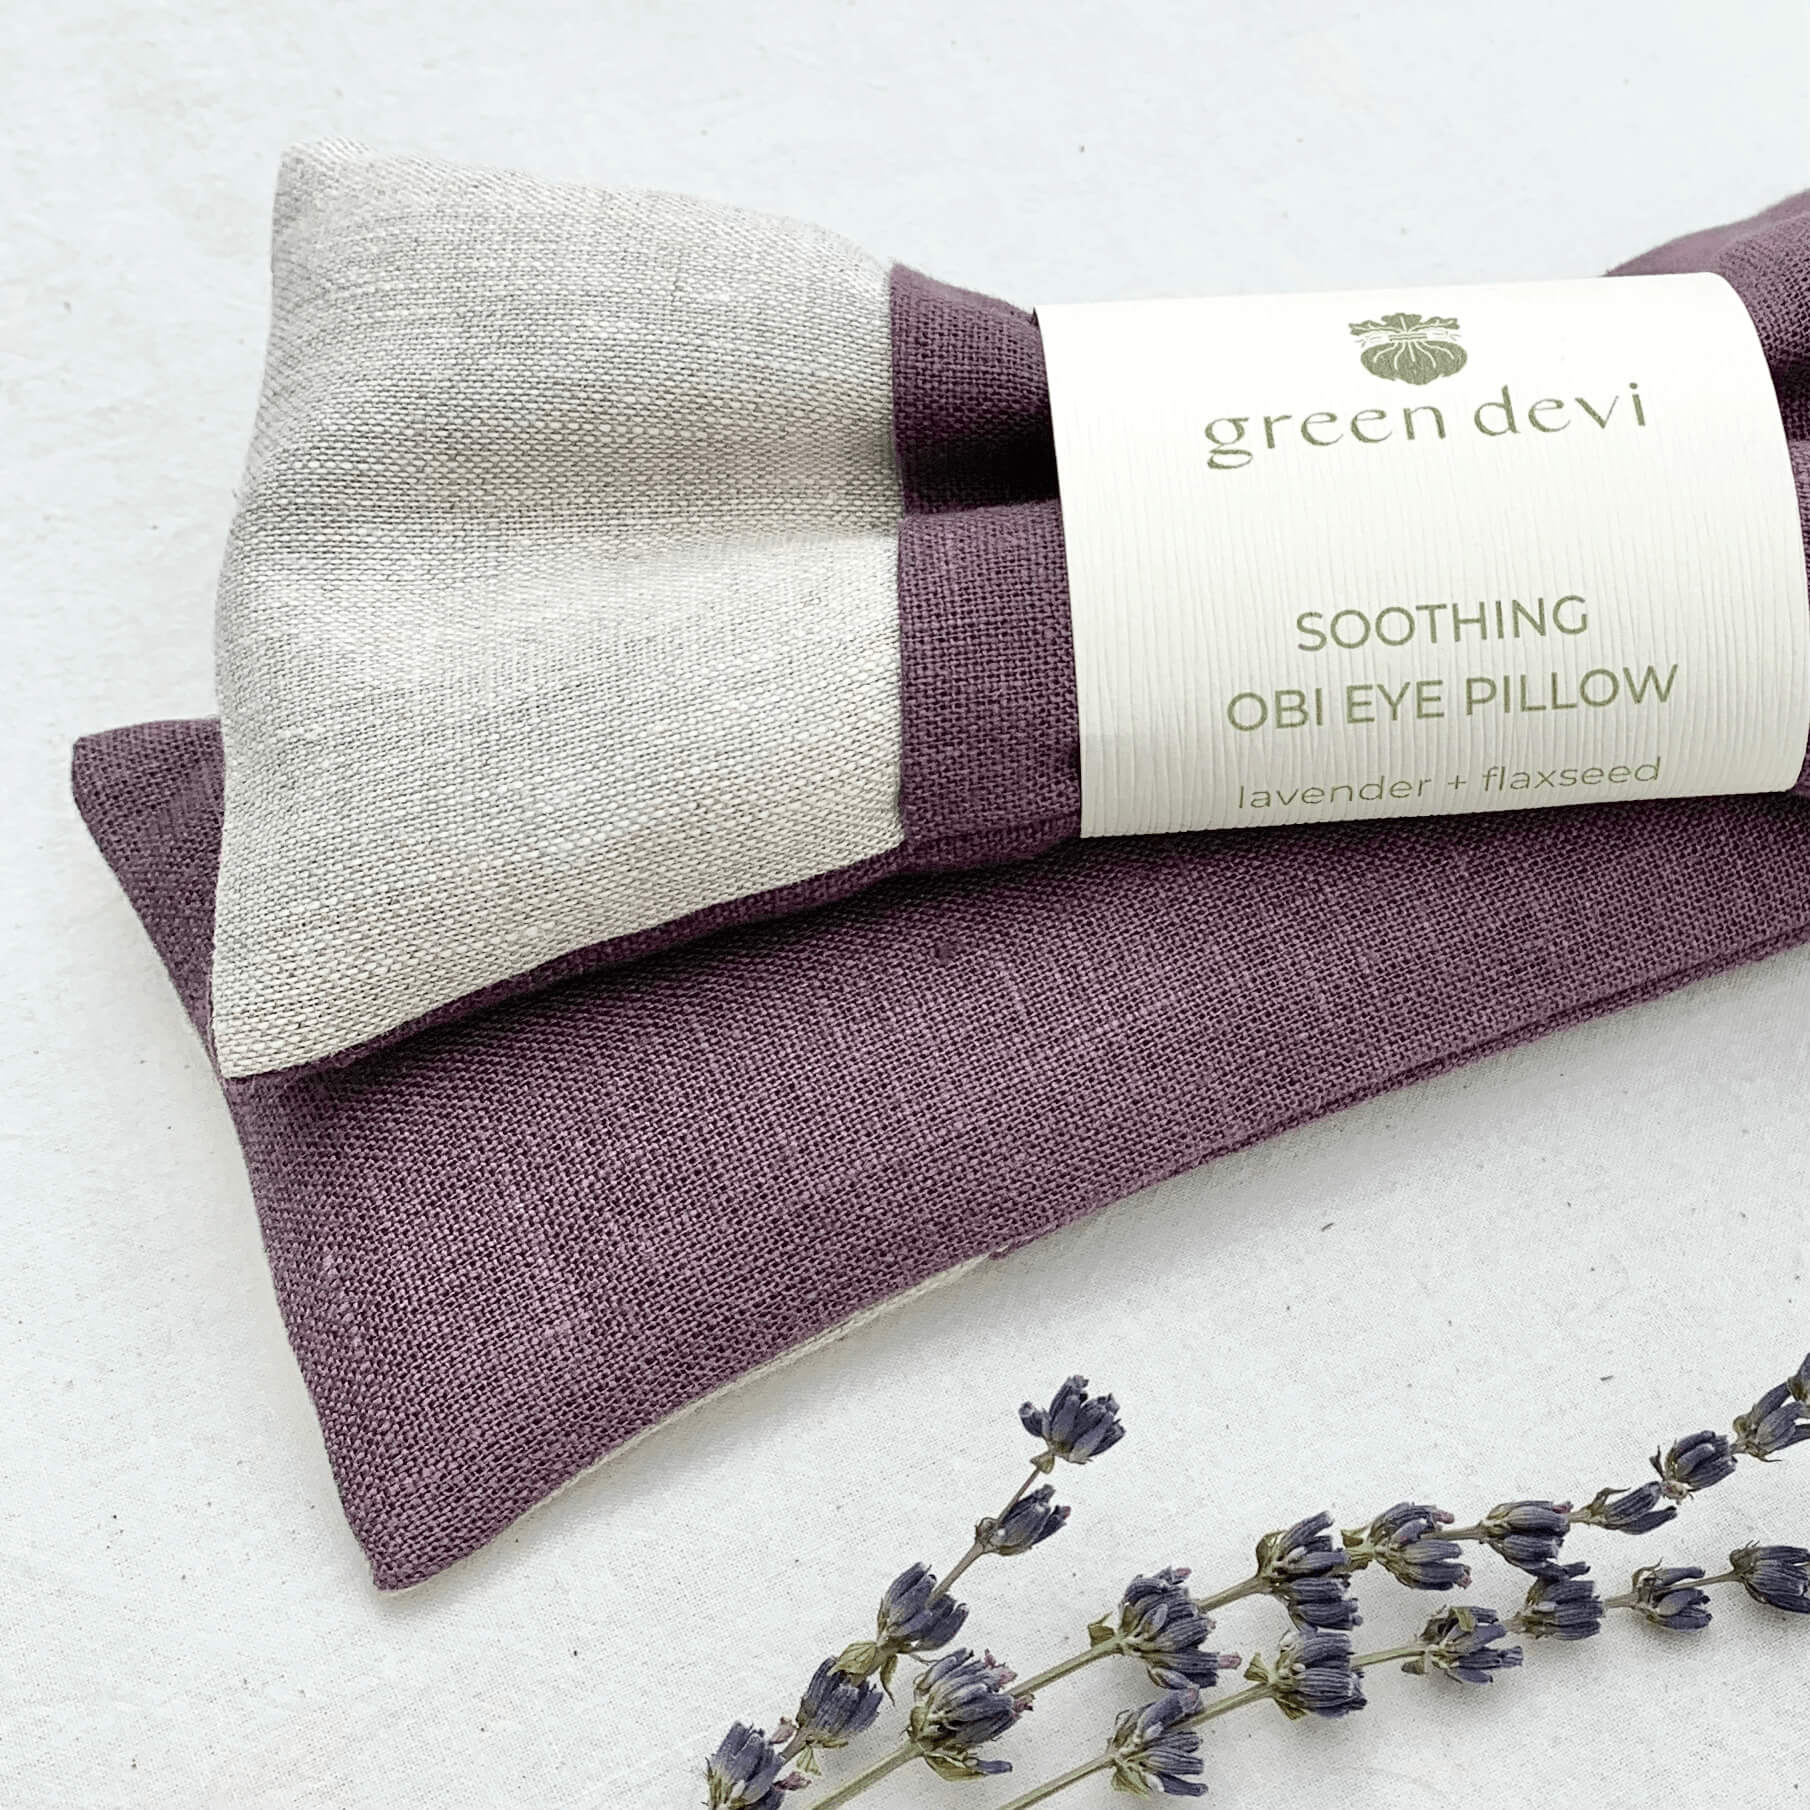 A pair of weighted eye pillows from Green Devi on a counter next to a fresh lavender sprig